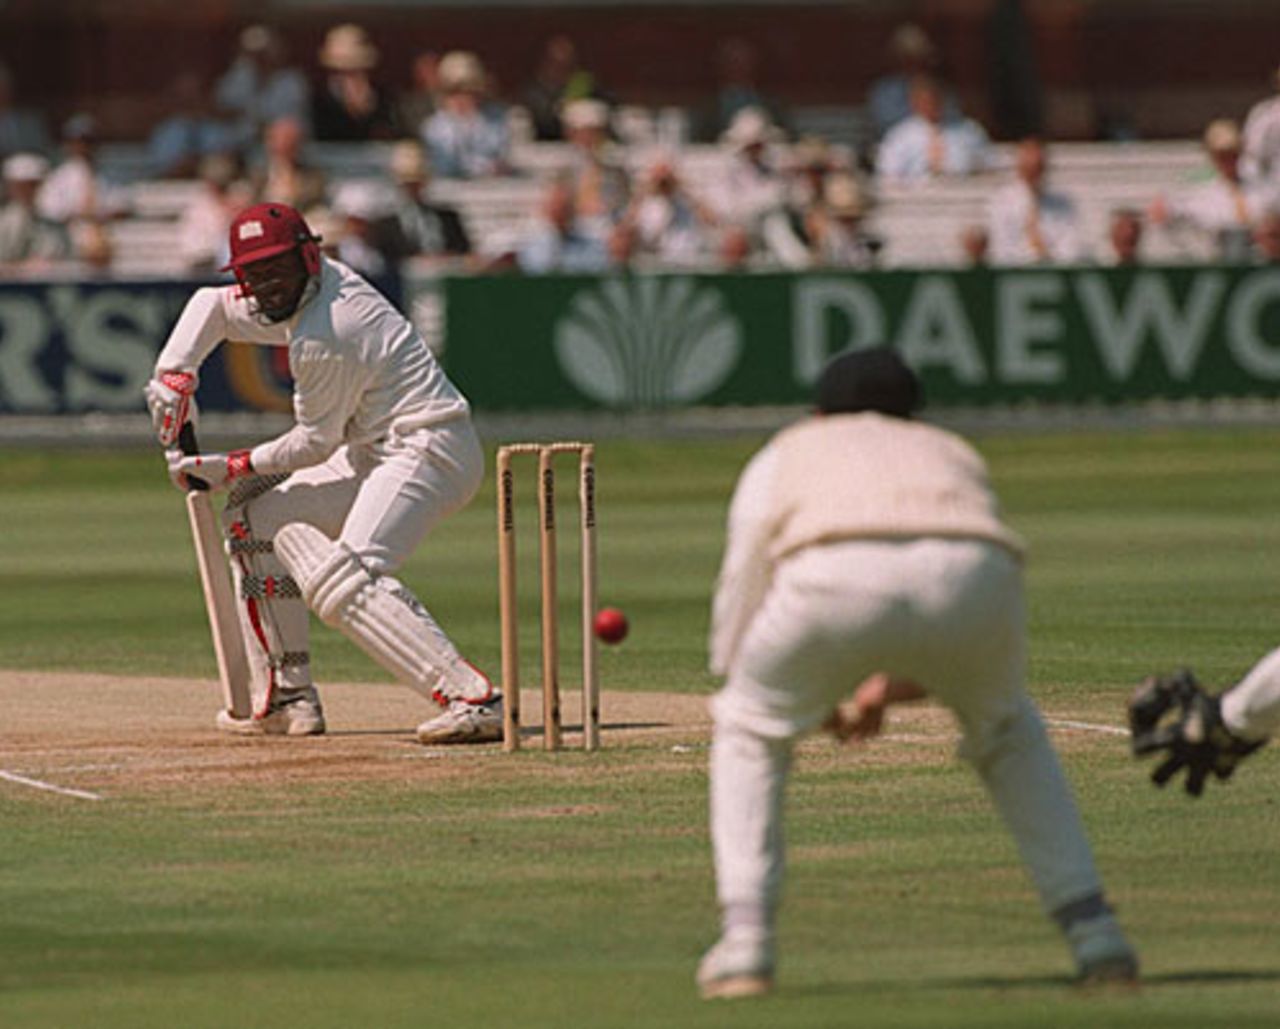 Brian Lara edges Darren Gough to a diving Alec Stewart who would take a brilliant catch to his left, England v West Indies, 2nd Test, Lord's, June 26, 1995